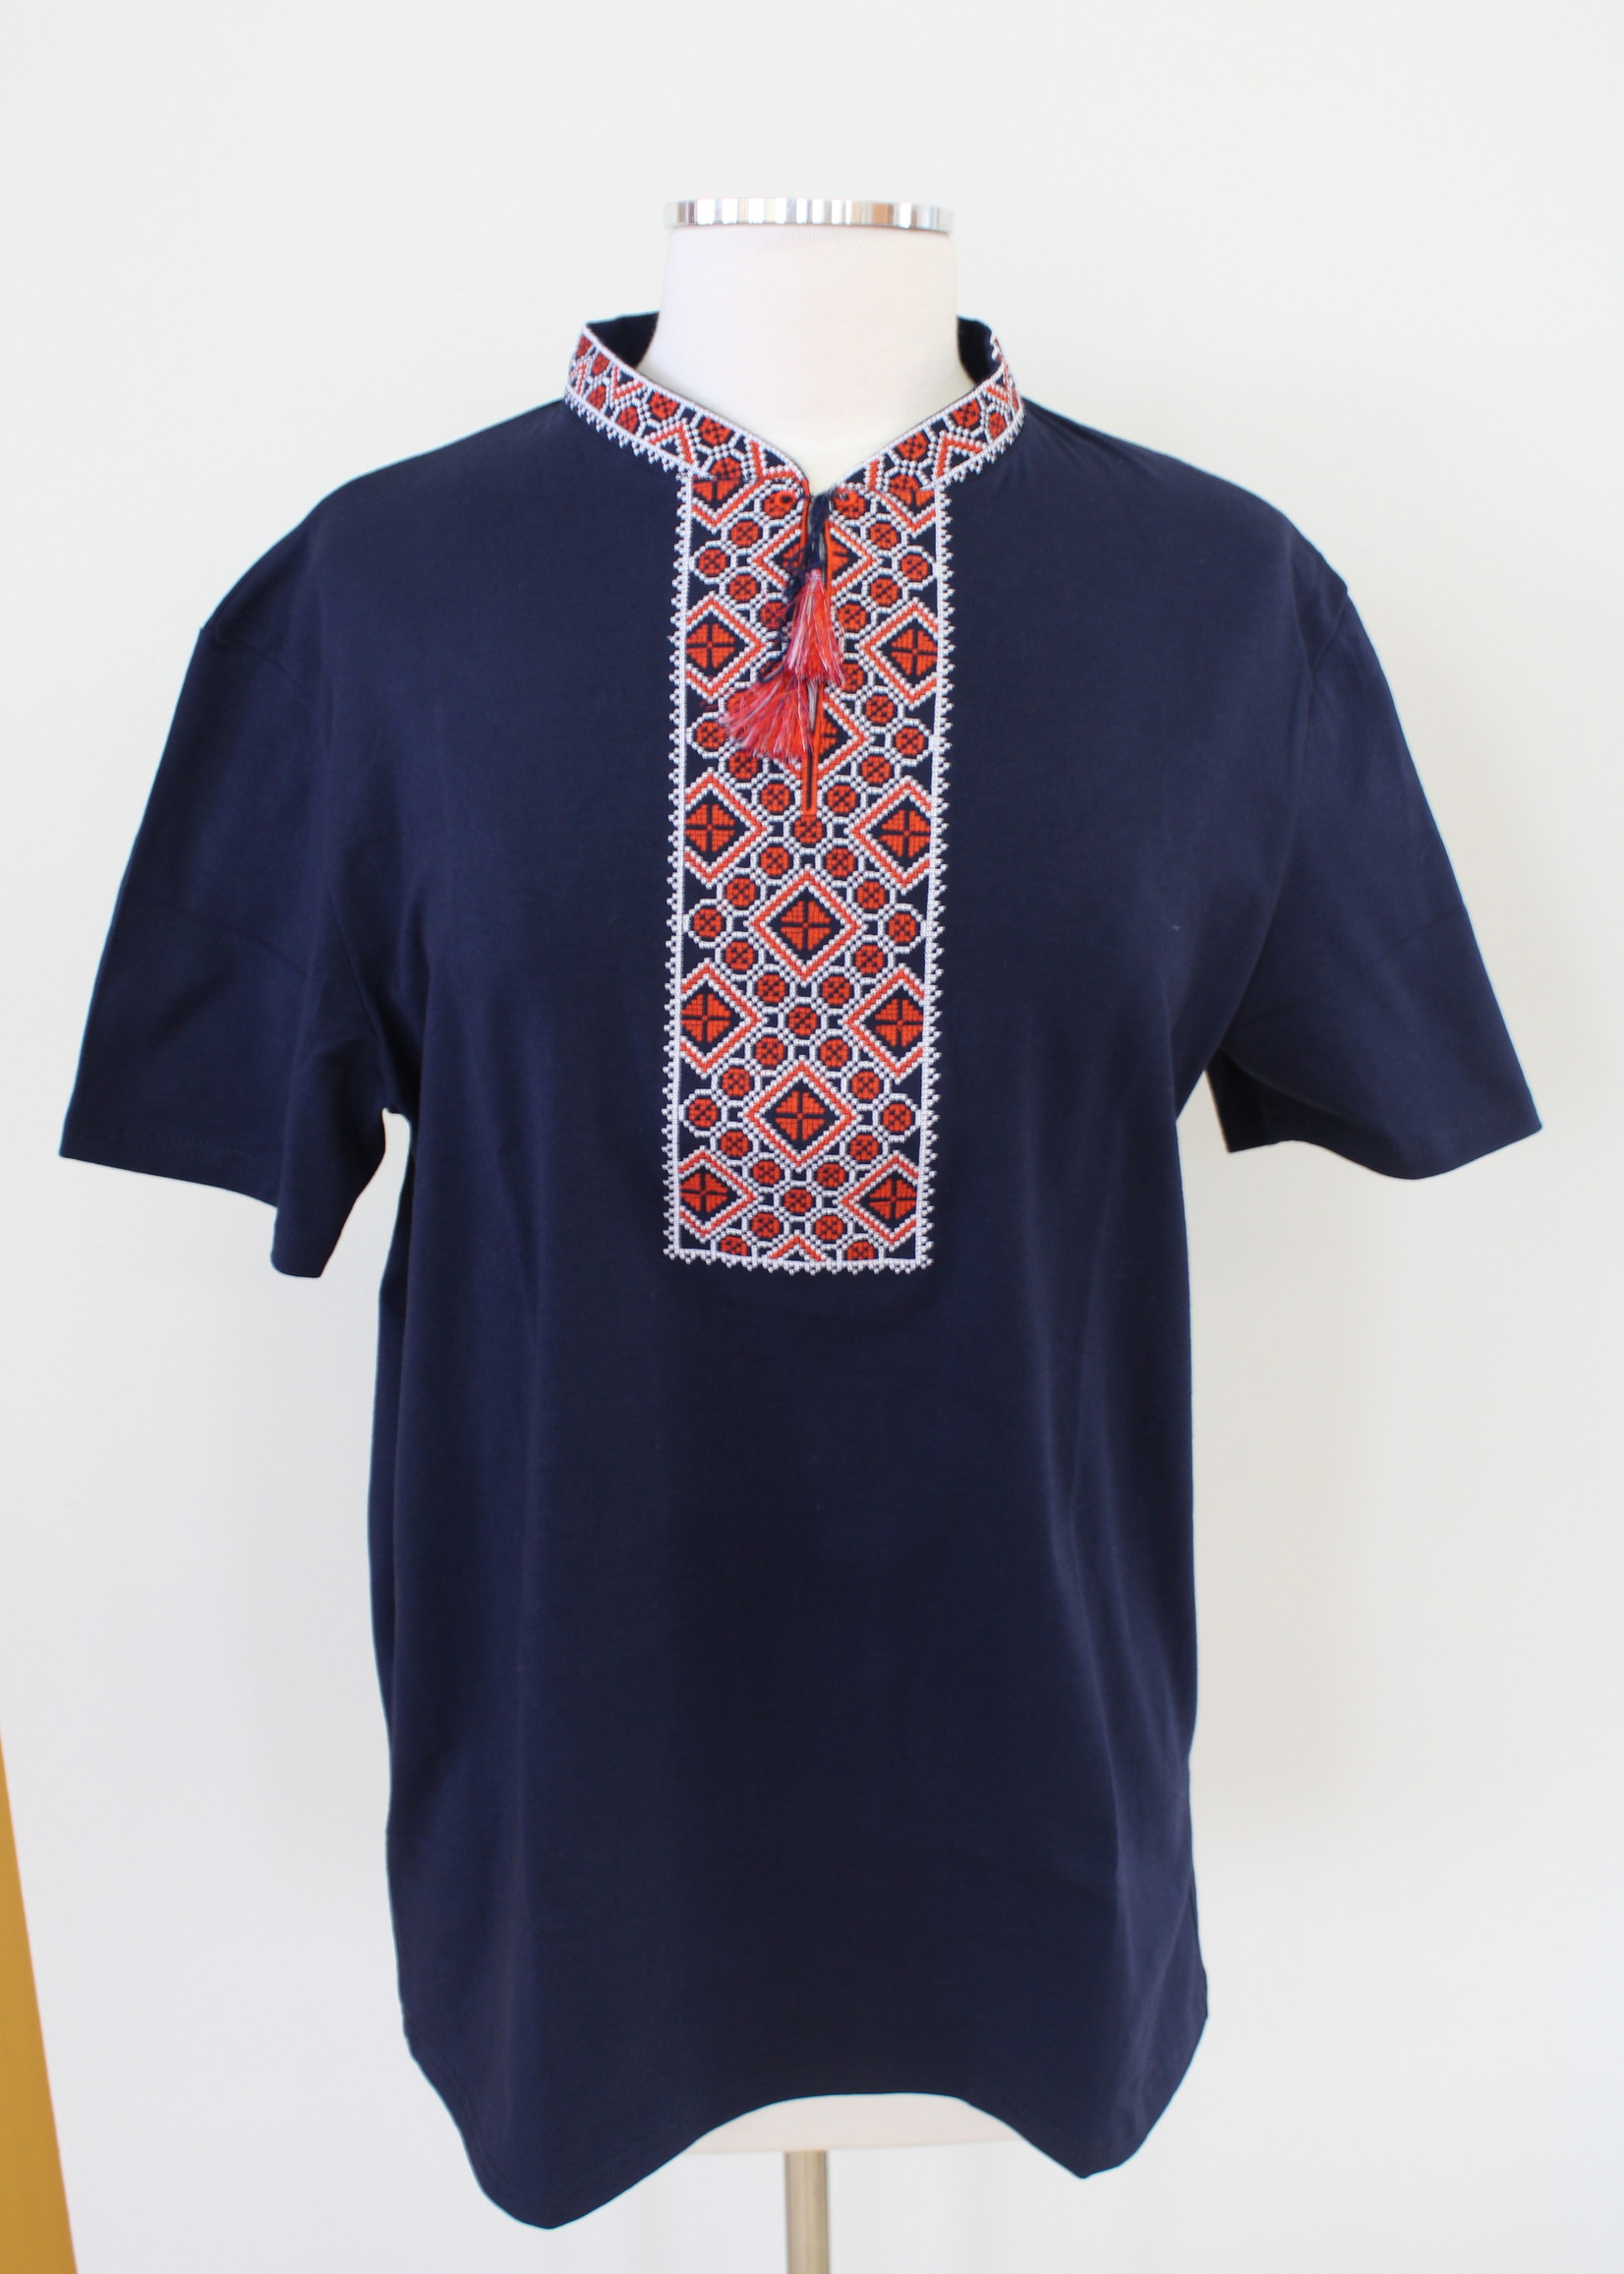 Navy T-shirt with Red Embroidery